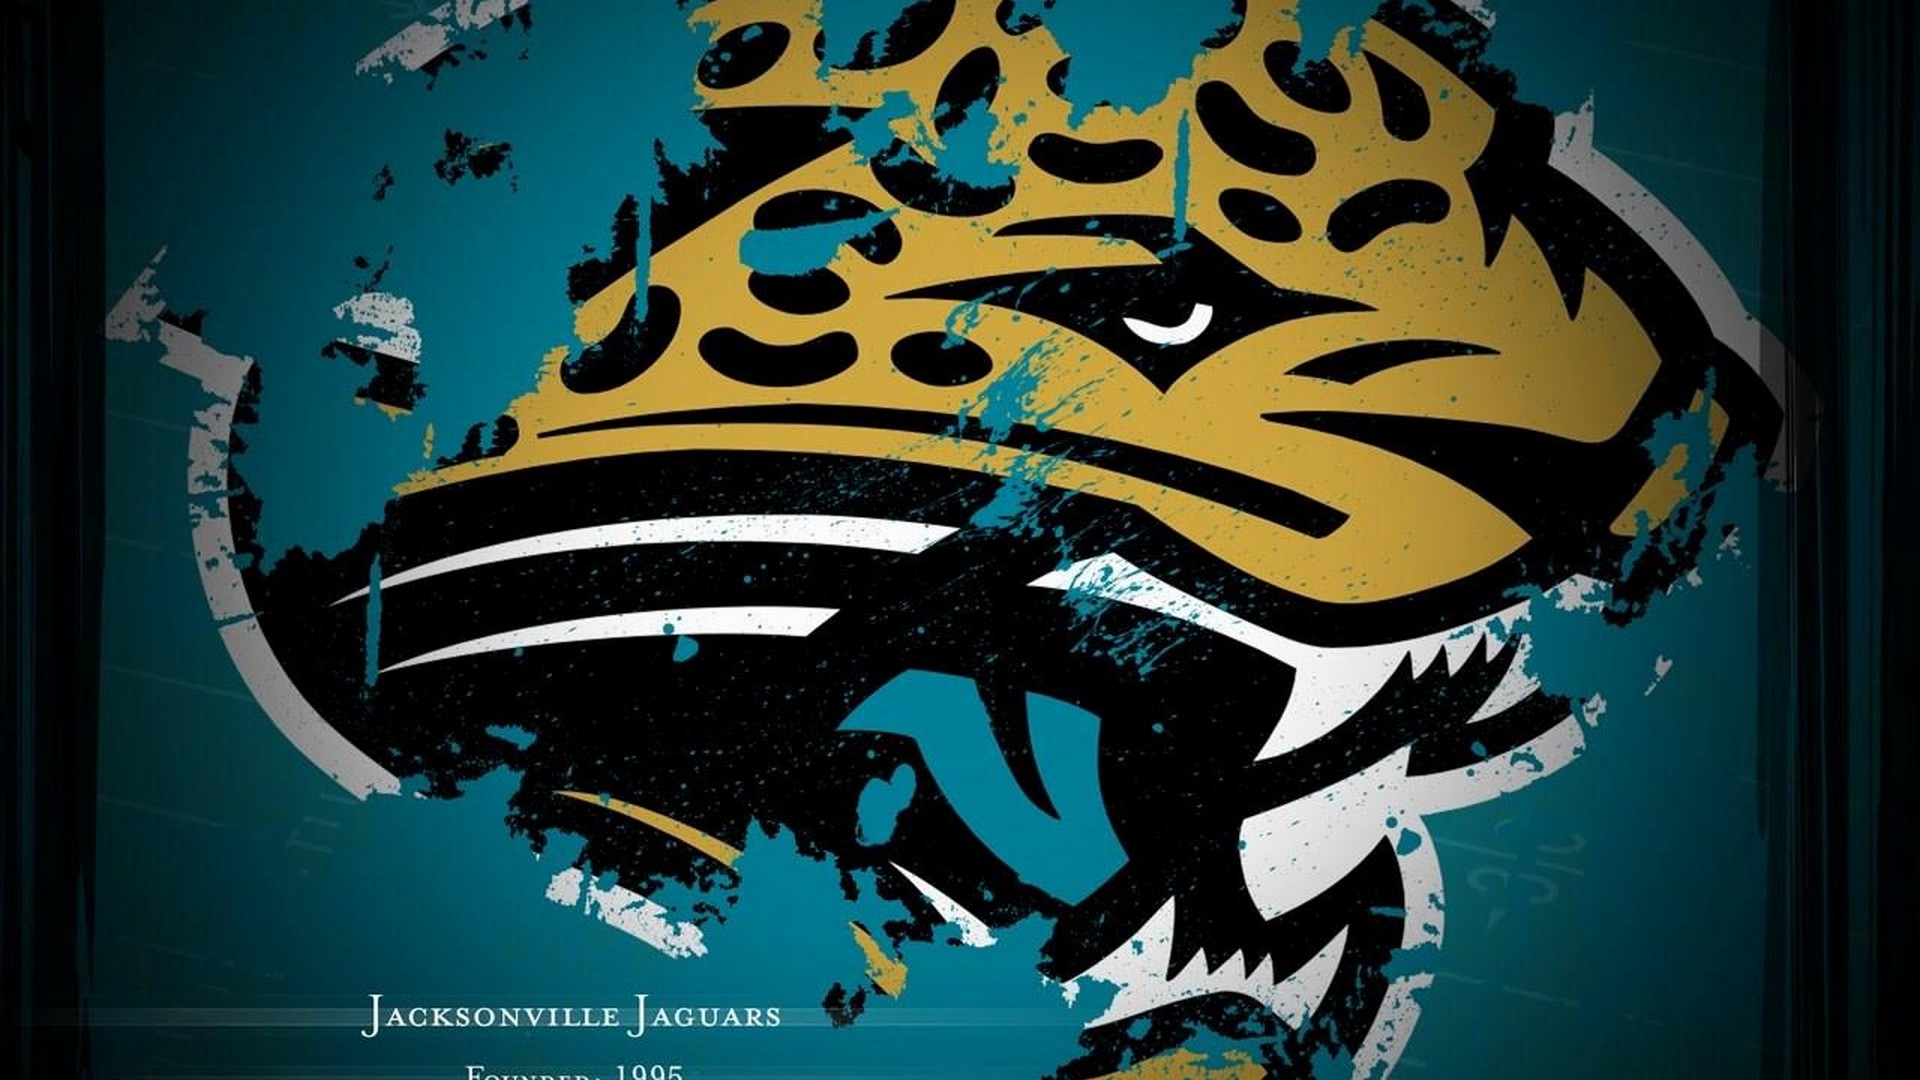 Jacksonville Jaguars Wallpaper For Mac OS with high-resolution 1920x1080 pixel. Download and set as wallpaper for Desktop Computer, Apple iPhone X, XS Max, XR, 8, 7, 6, SE, iPad, Android